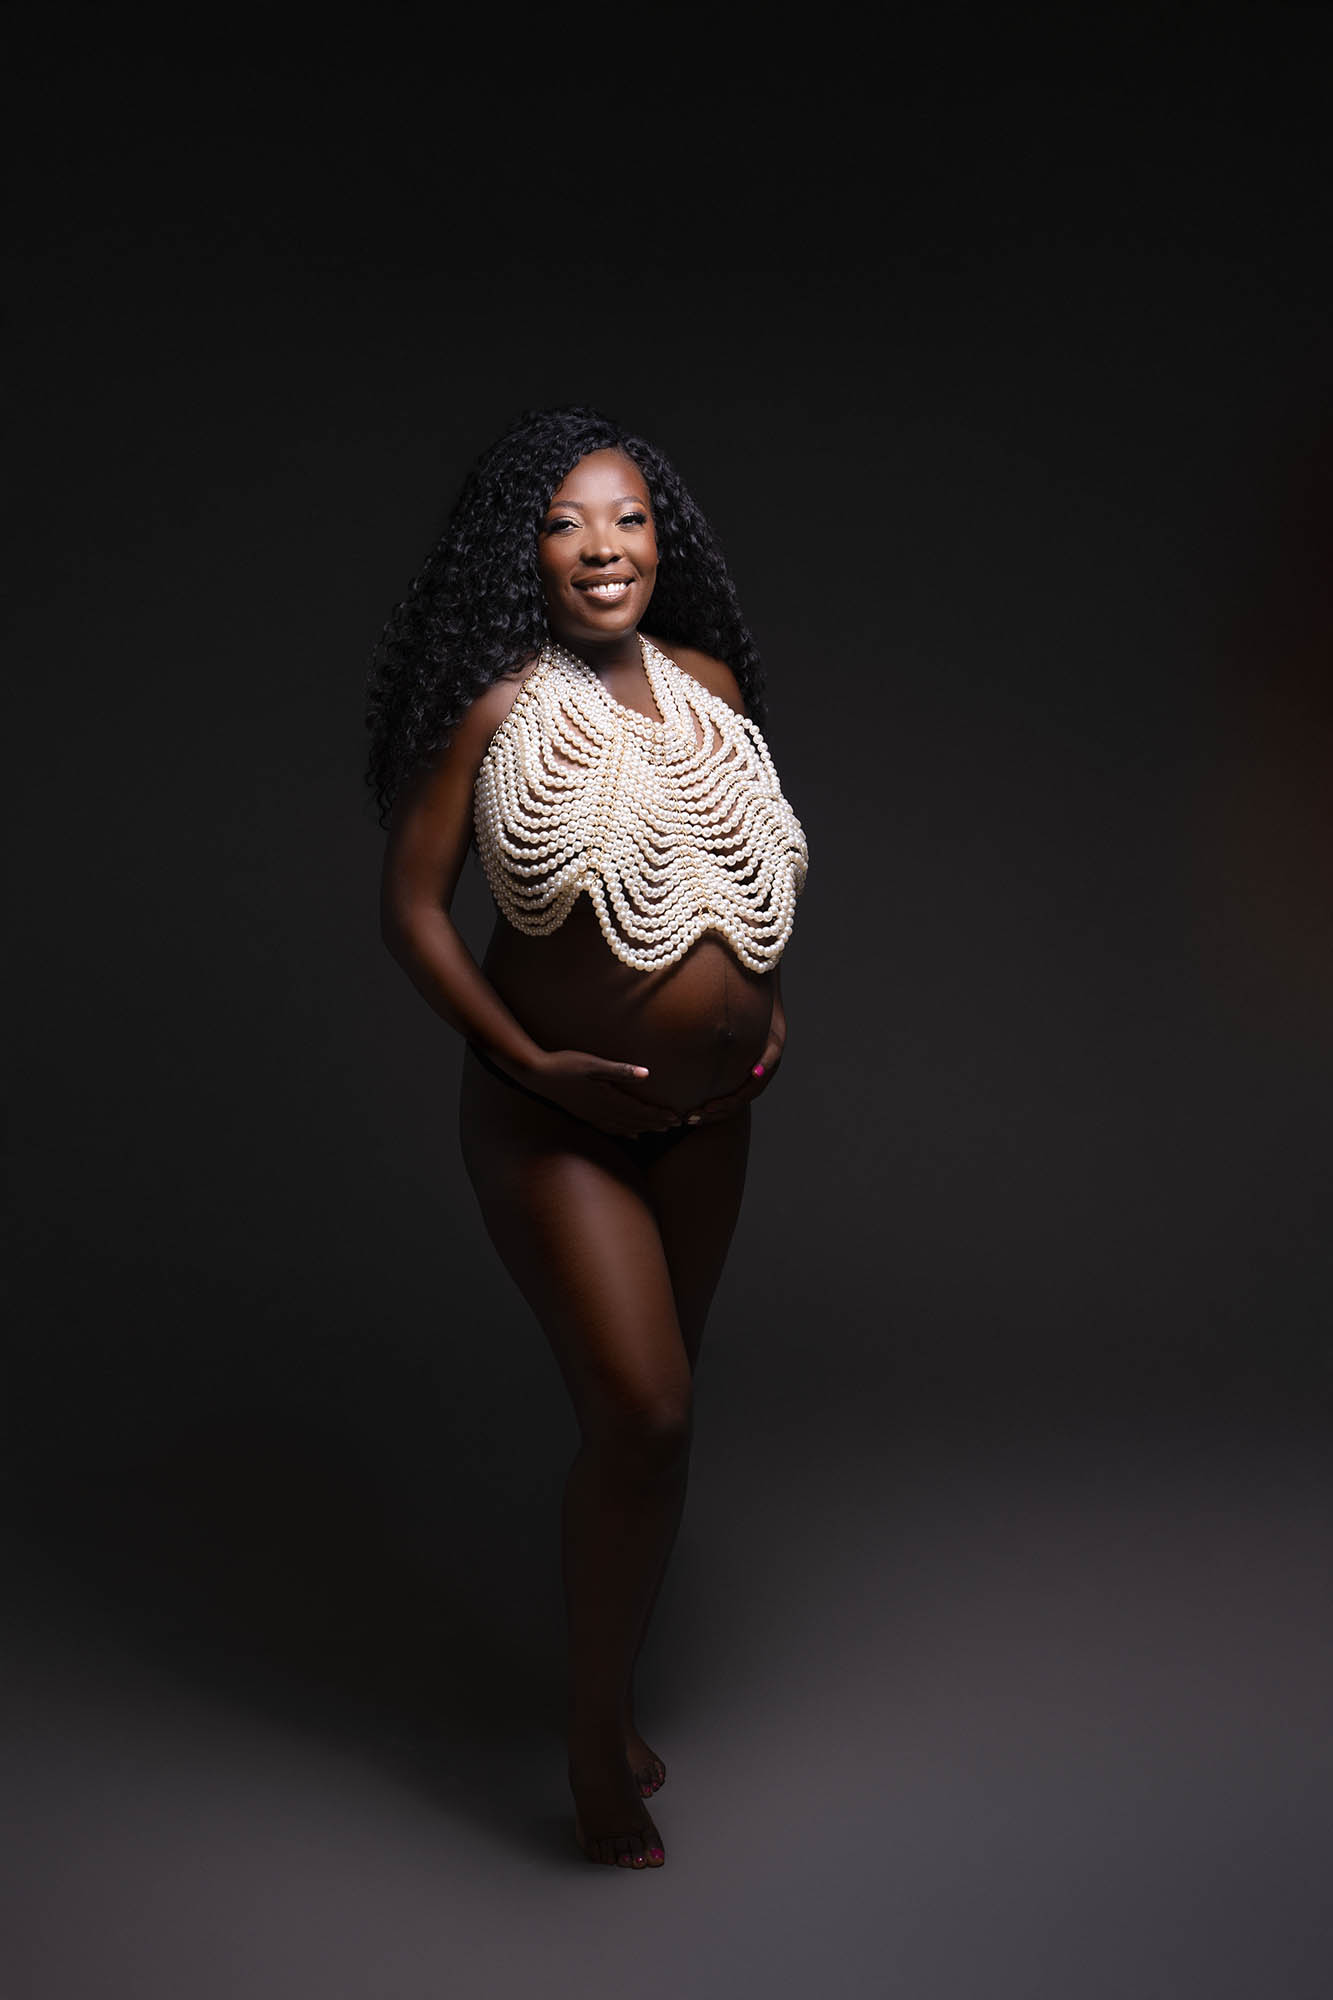 professional maternity photo of a pregnant woman posed wearing a large pearl necklace covering her chest sitting above her pregnant belly by maternity photographer Beautiful Bairns photography